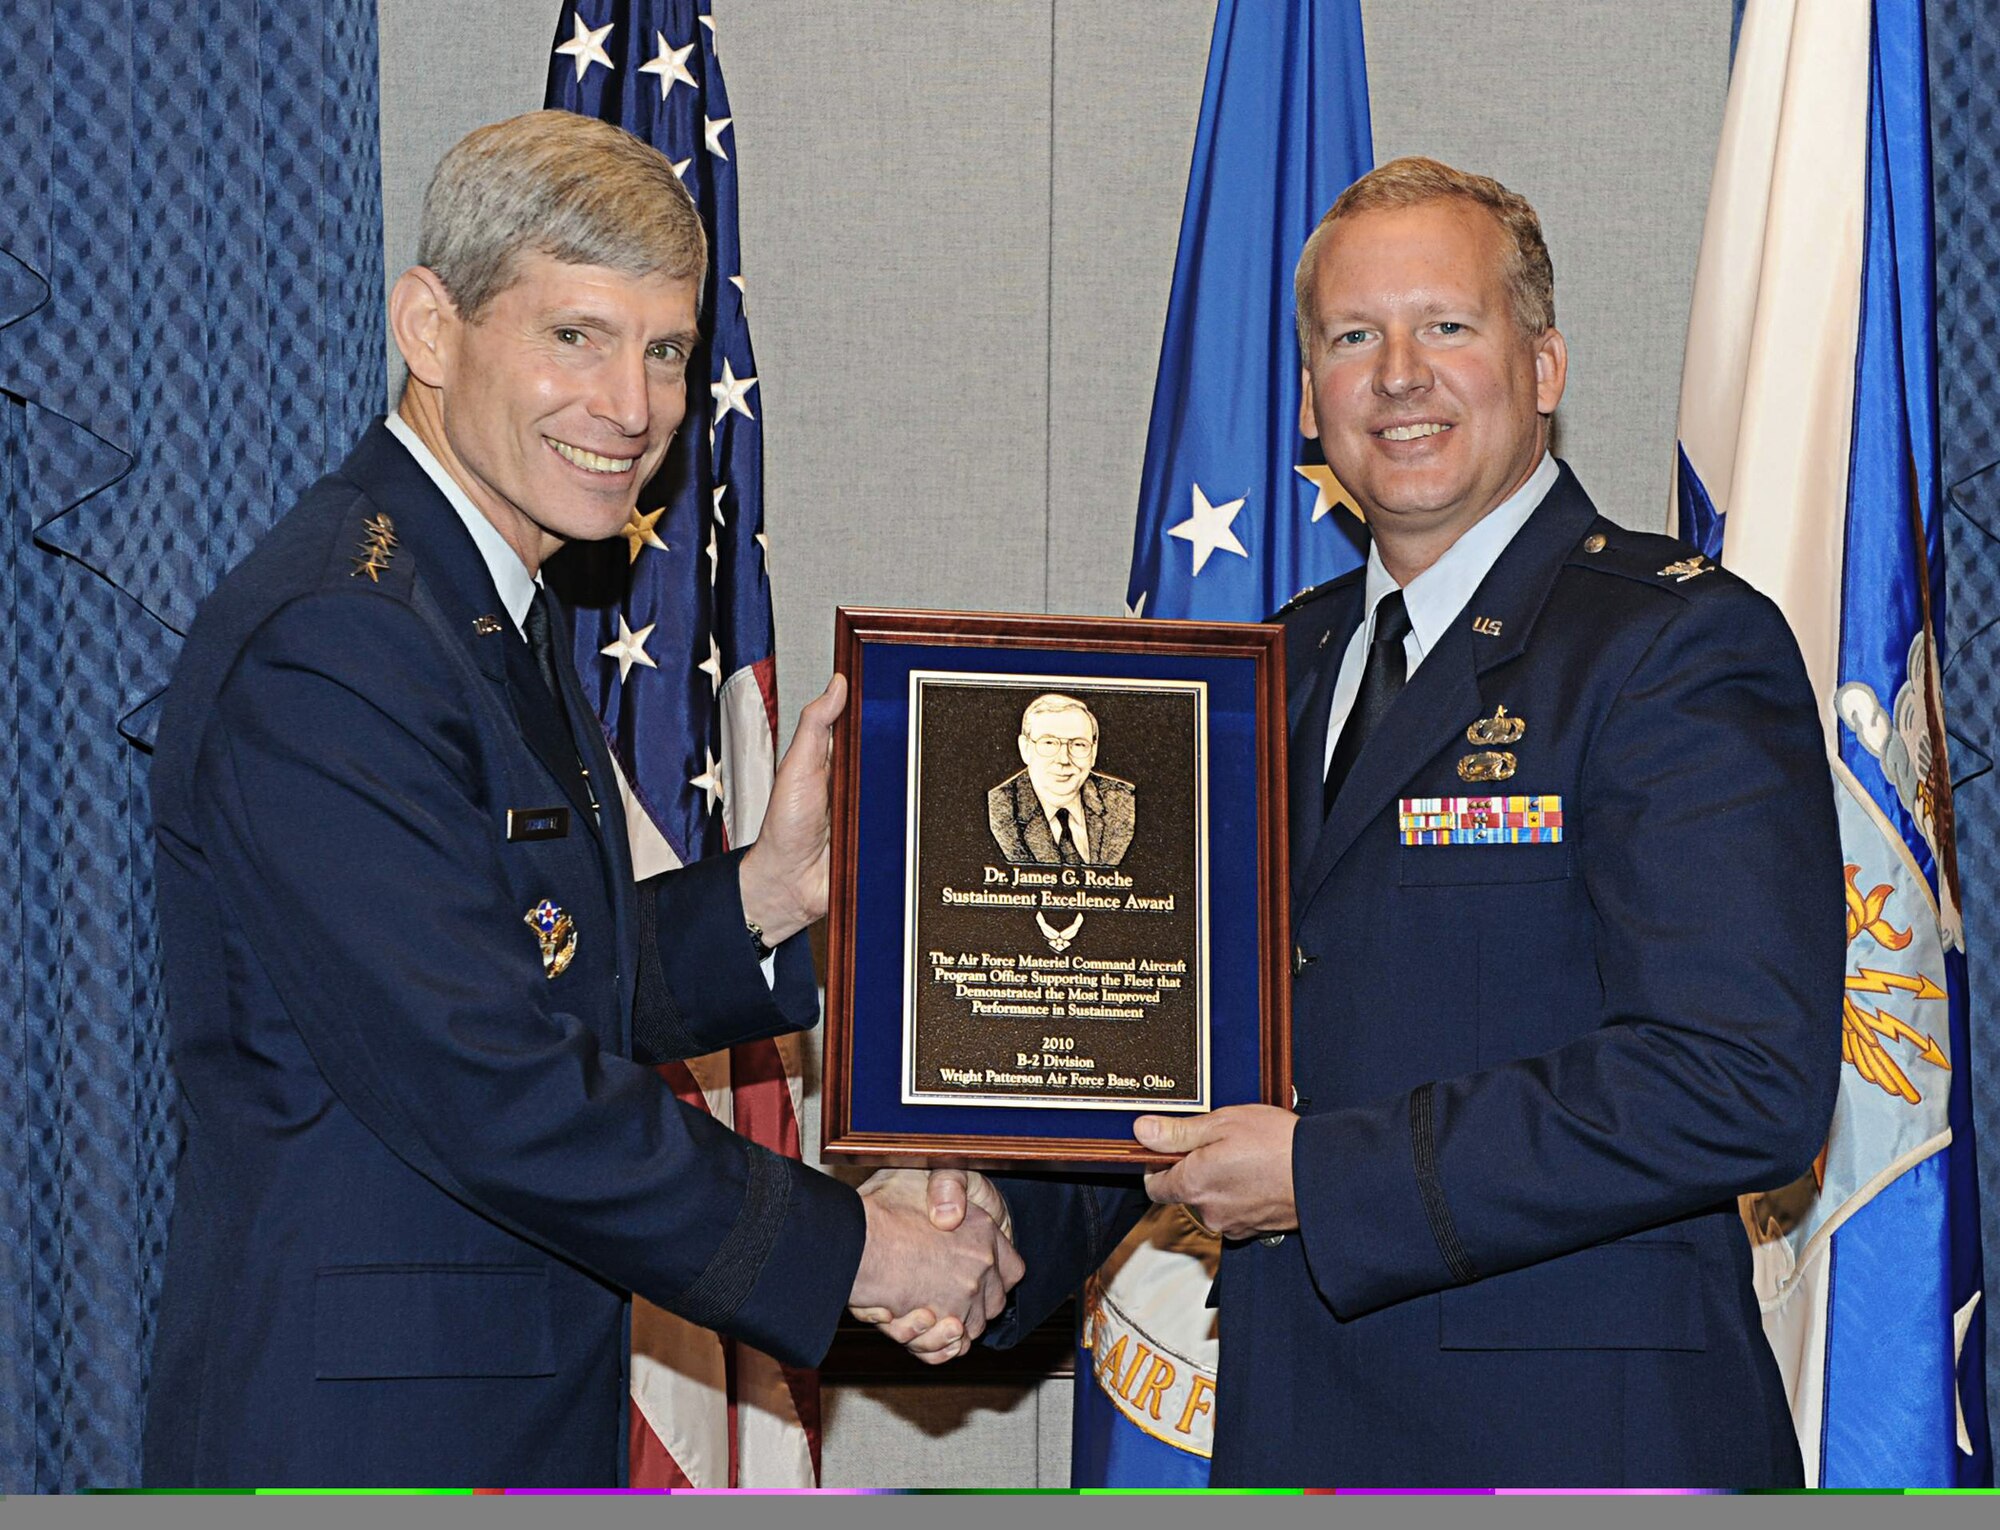 Air Force Chief of Staff Gen. Norton Schwartz presents the 2010 Dr. James G. 
Roche Sustainment Excellence Award to Col. Mark Williams, Chief of the B-2 Division at Wright-Patterson Air Force Base, Ohio, during a ceremony in the Pentagon April 11, 2011. Colonel Williams represented all the members of the B-2 Spirit division, which won the award for demonstrating the most improved performance in aircraft maintenance and logistics readiness.  (U.S. Air Force photo/Andy Morataya)
